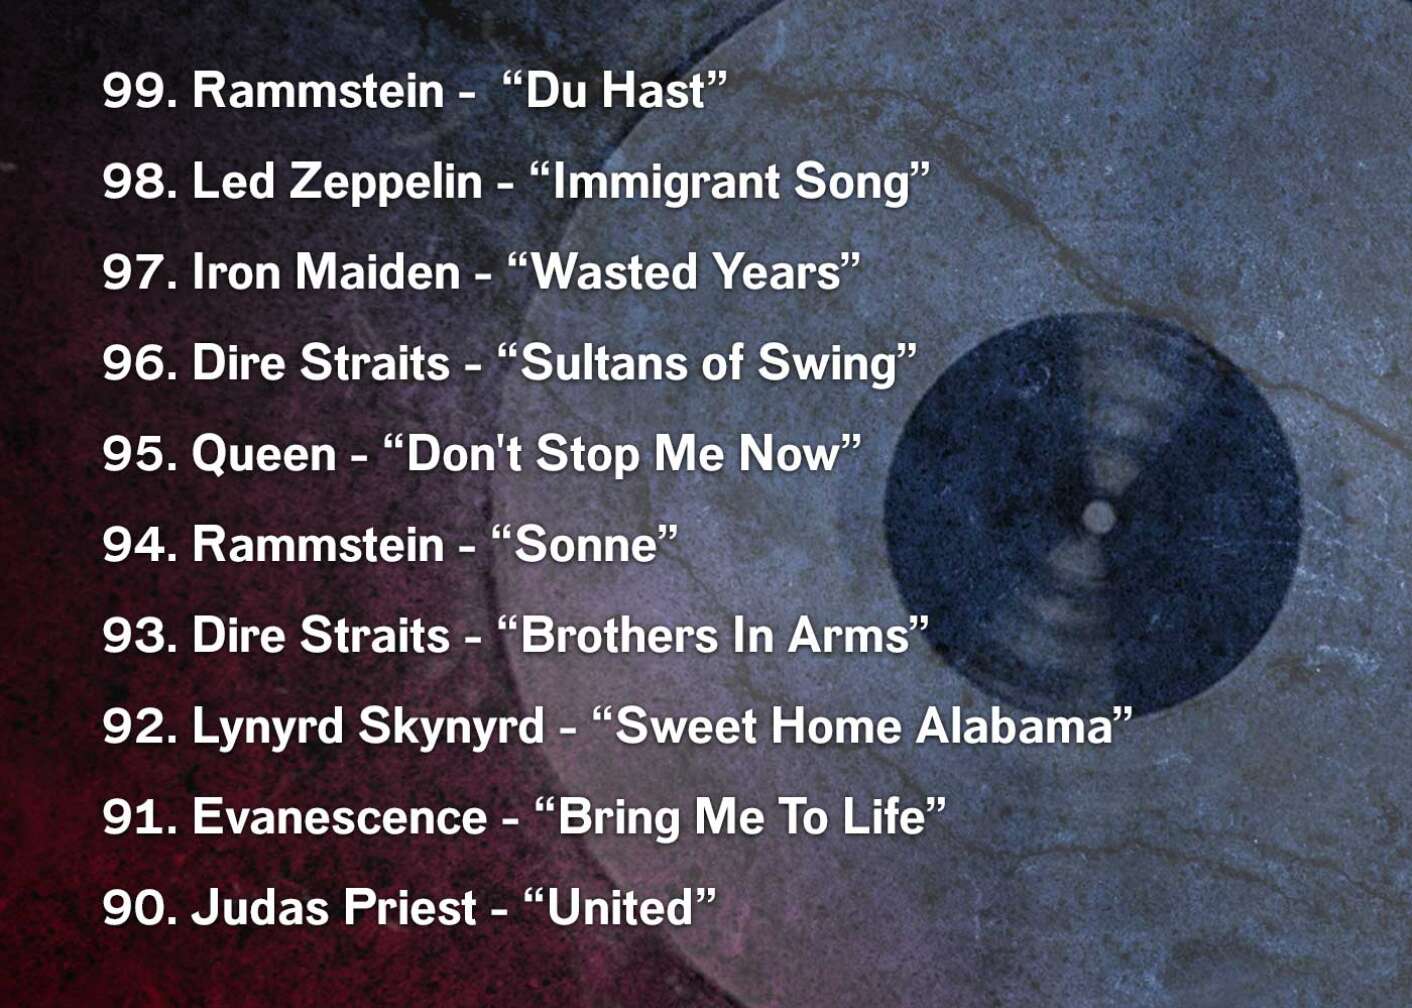 99. Rammstein -	“Du Hast” 98. Led Zeppelin - “Immigrant Song” 97. Iron Maiden - “Wasted Years” 96. Dire Straits - “Sultans of Swing” 95. Queen - “Don't Stop Me Now” 94. Rammstein - “Sonne” 93. Dire Straits - “Brothers In Arms” 92. Lynyrd Skynyrd - “Sweet Home Alabama” 91. Evanescence - “Bring Me To Life” 90. Judas Priest - “United”